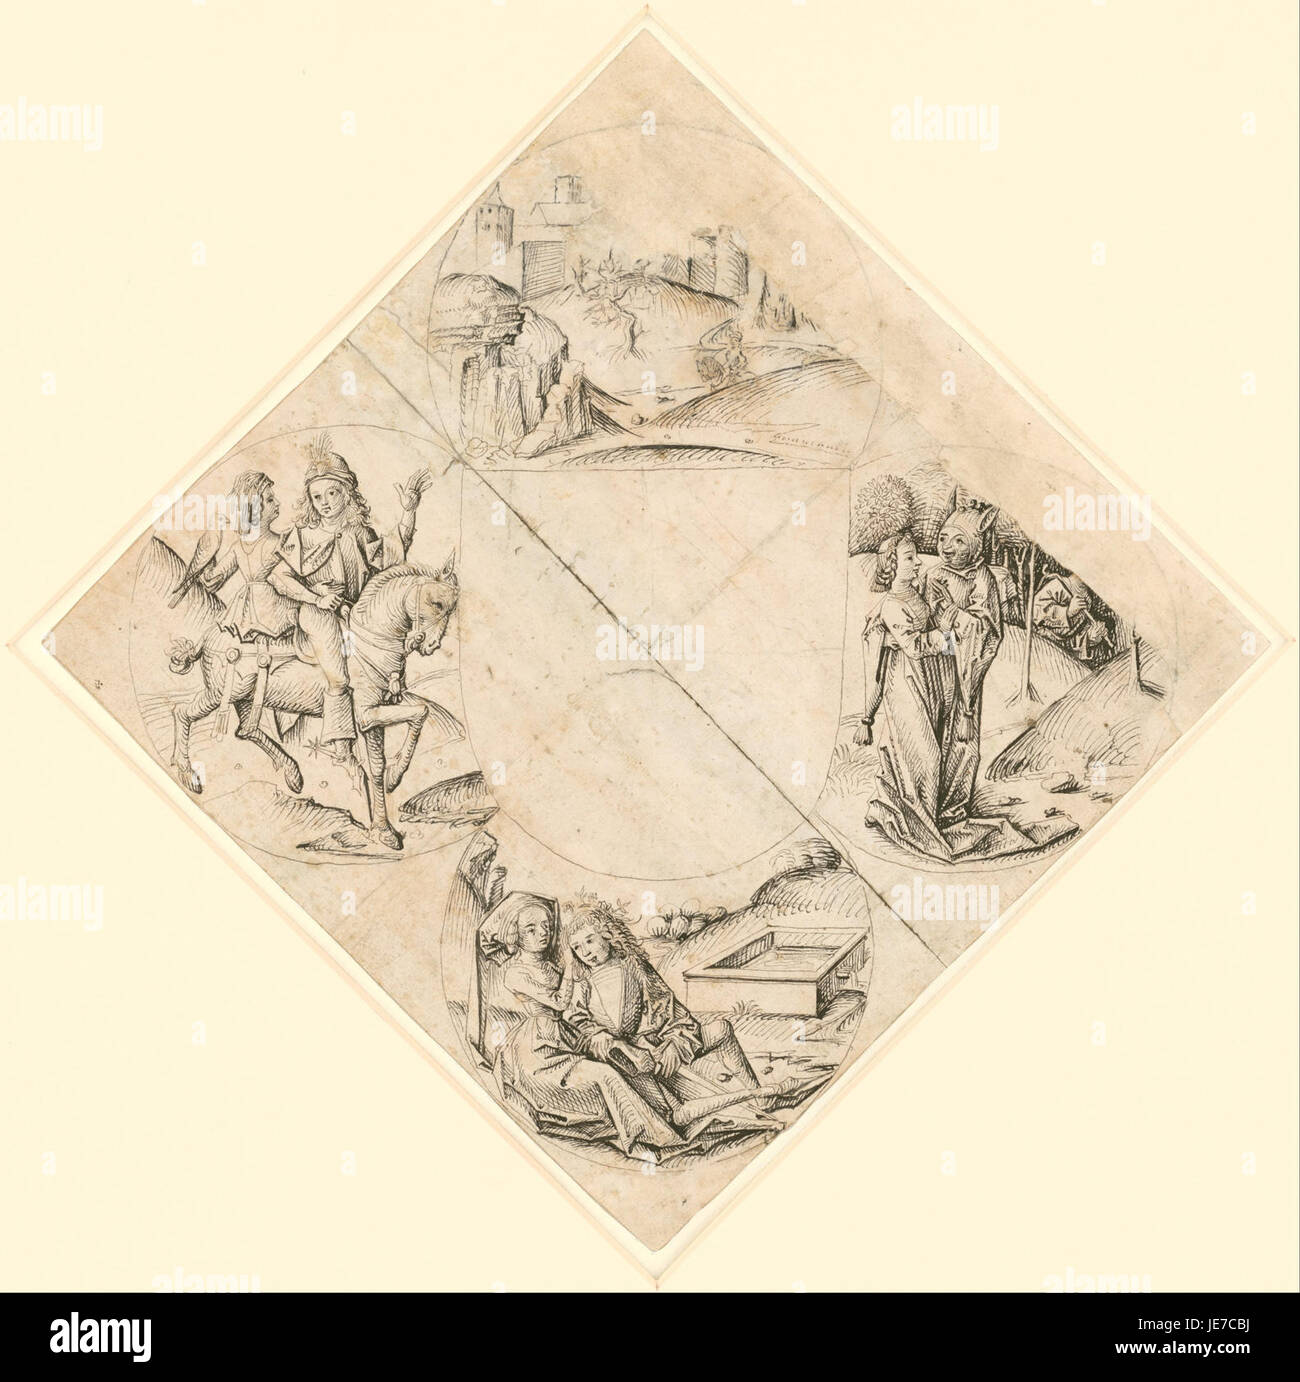 After The Master of the Housebook (German, active about 1470 - 1500) - Design for a Quatrefoil with a Castle, Two Lovers, a Maiden Tempted by a Fool, a Couple Seated by a ... - Stock Photo